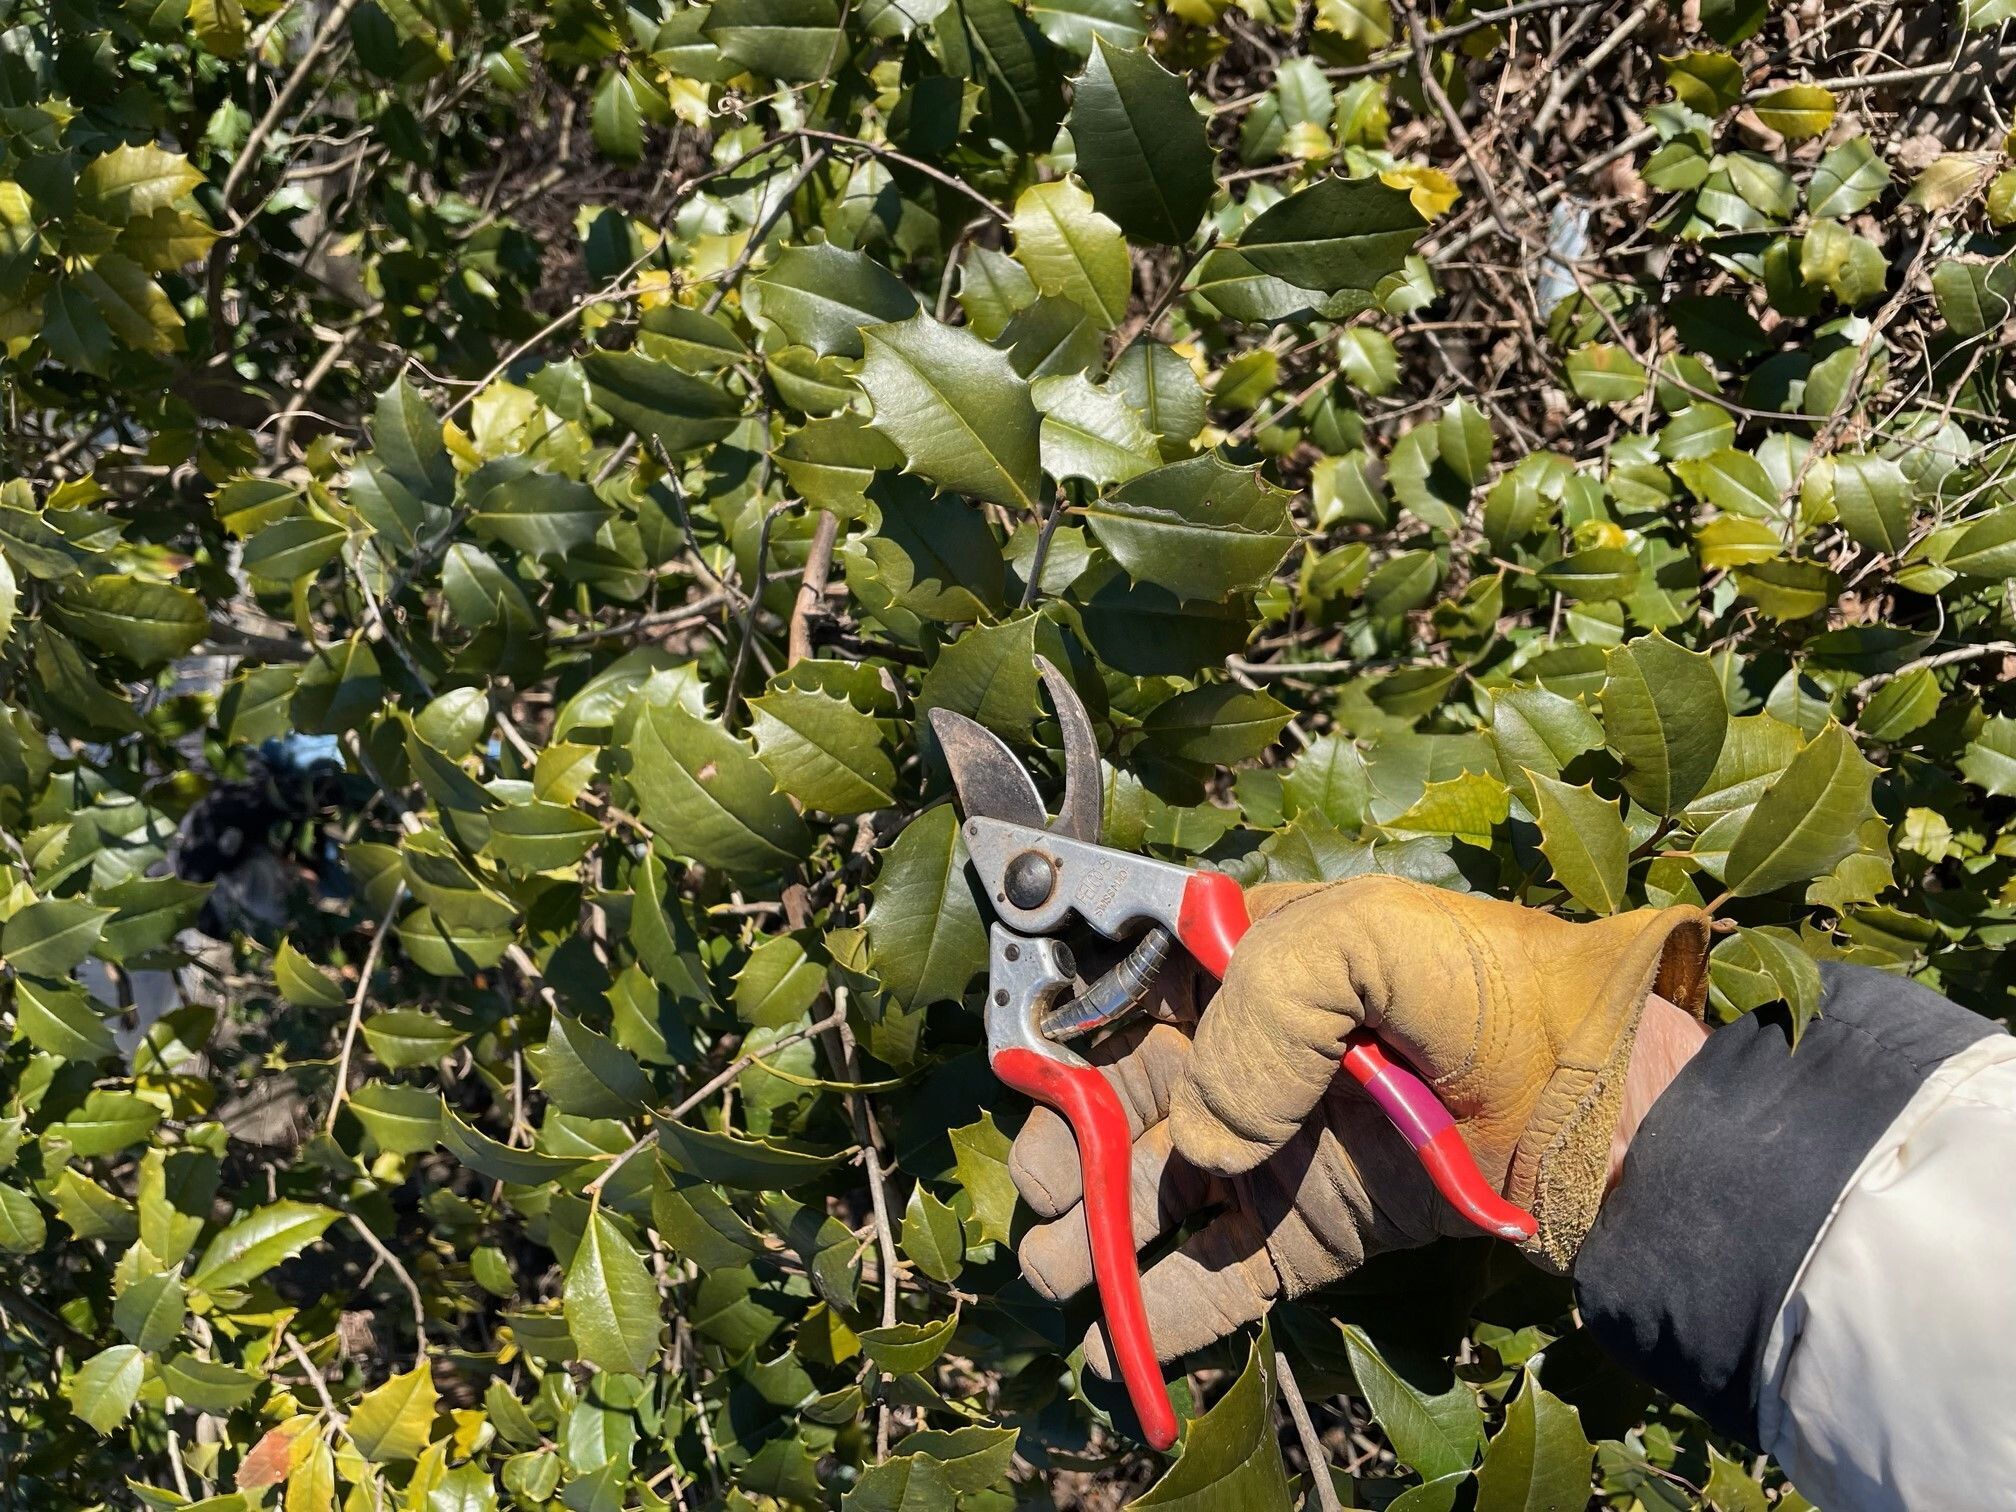 Learn to Prune Your Own Yard!